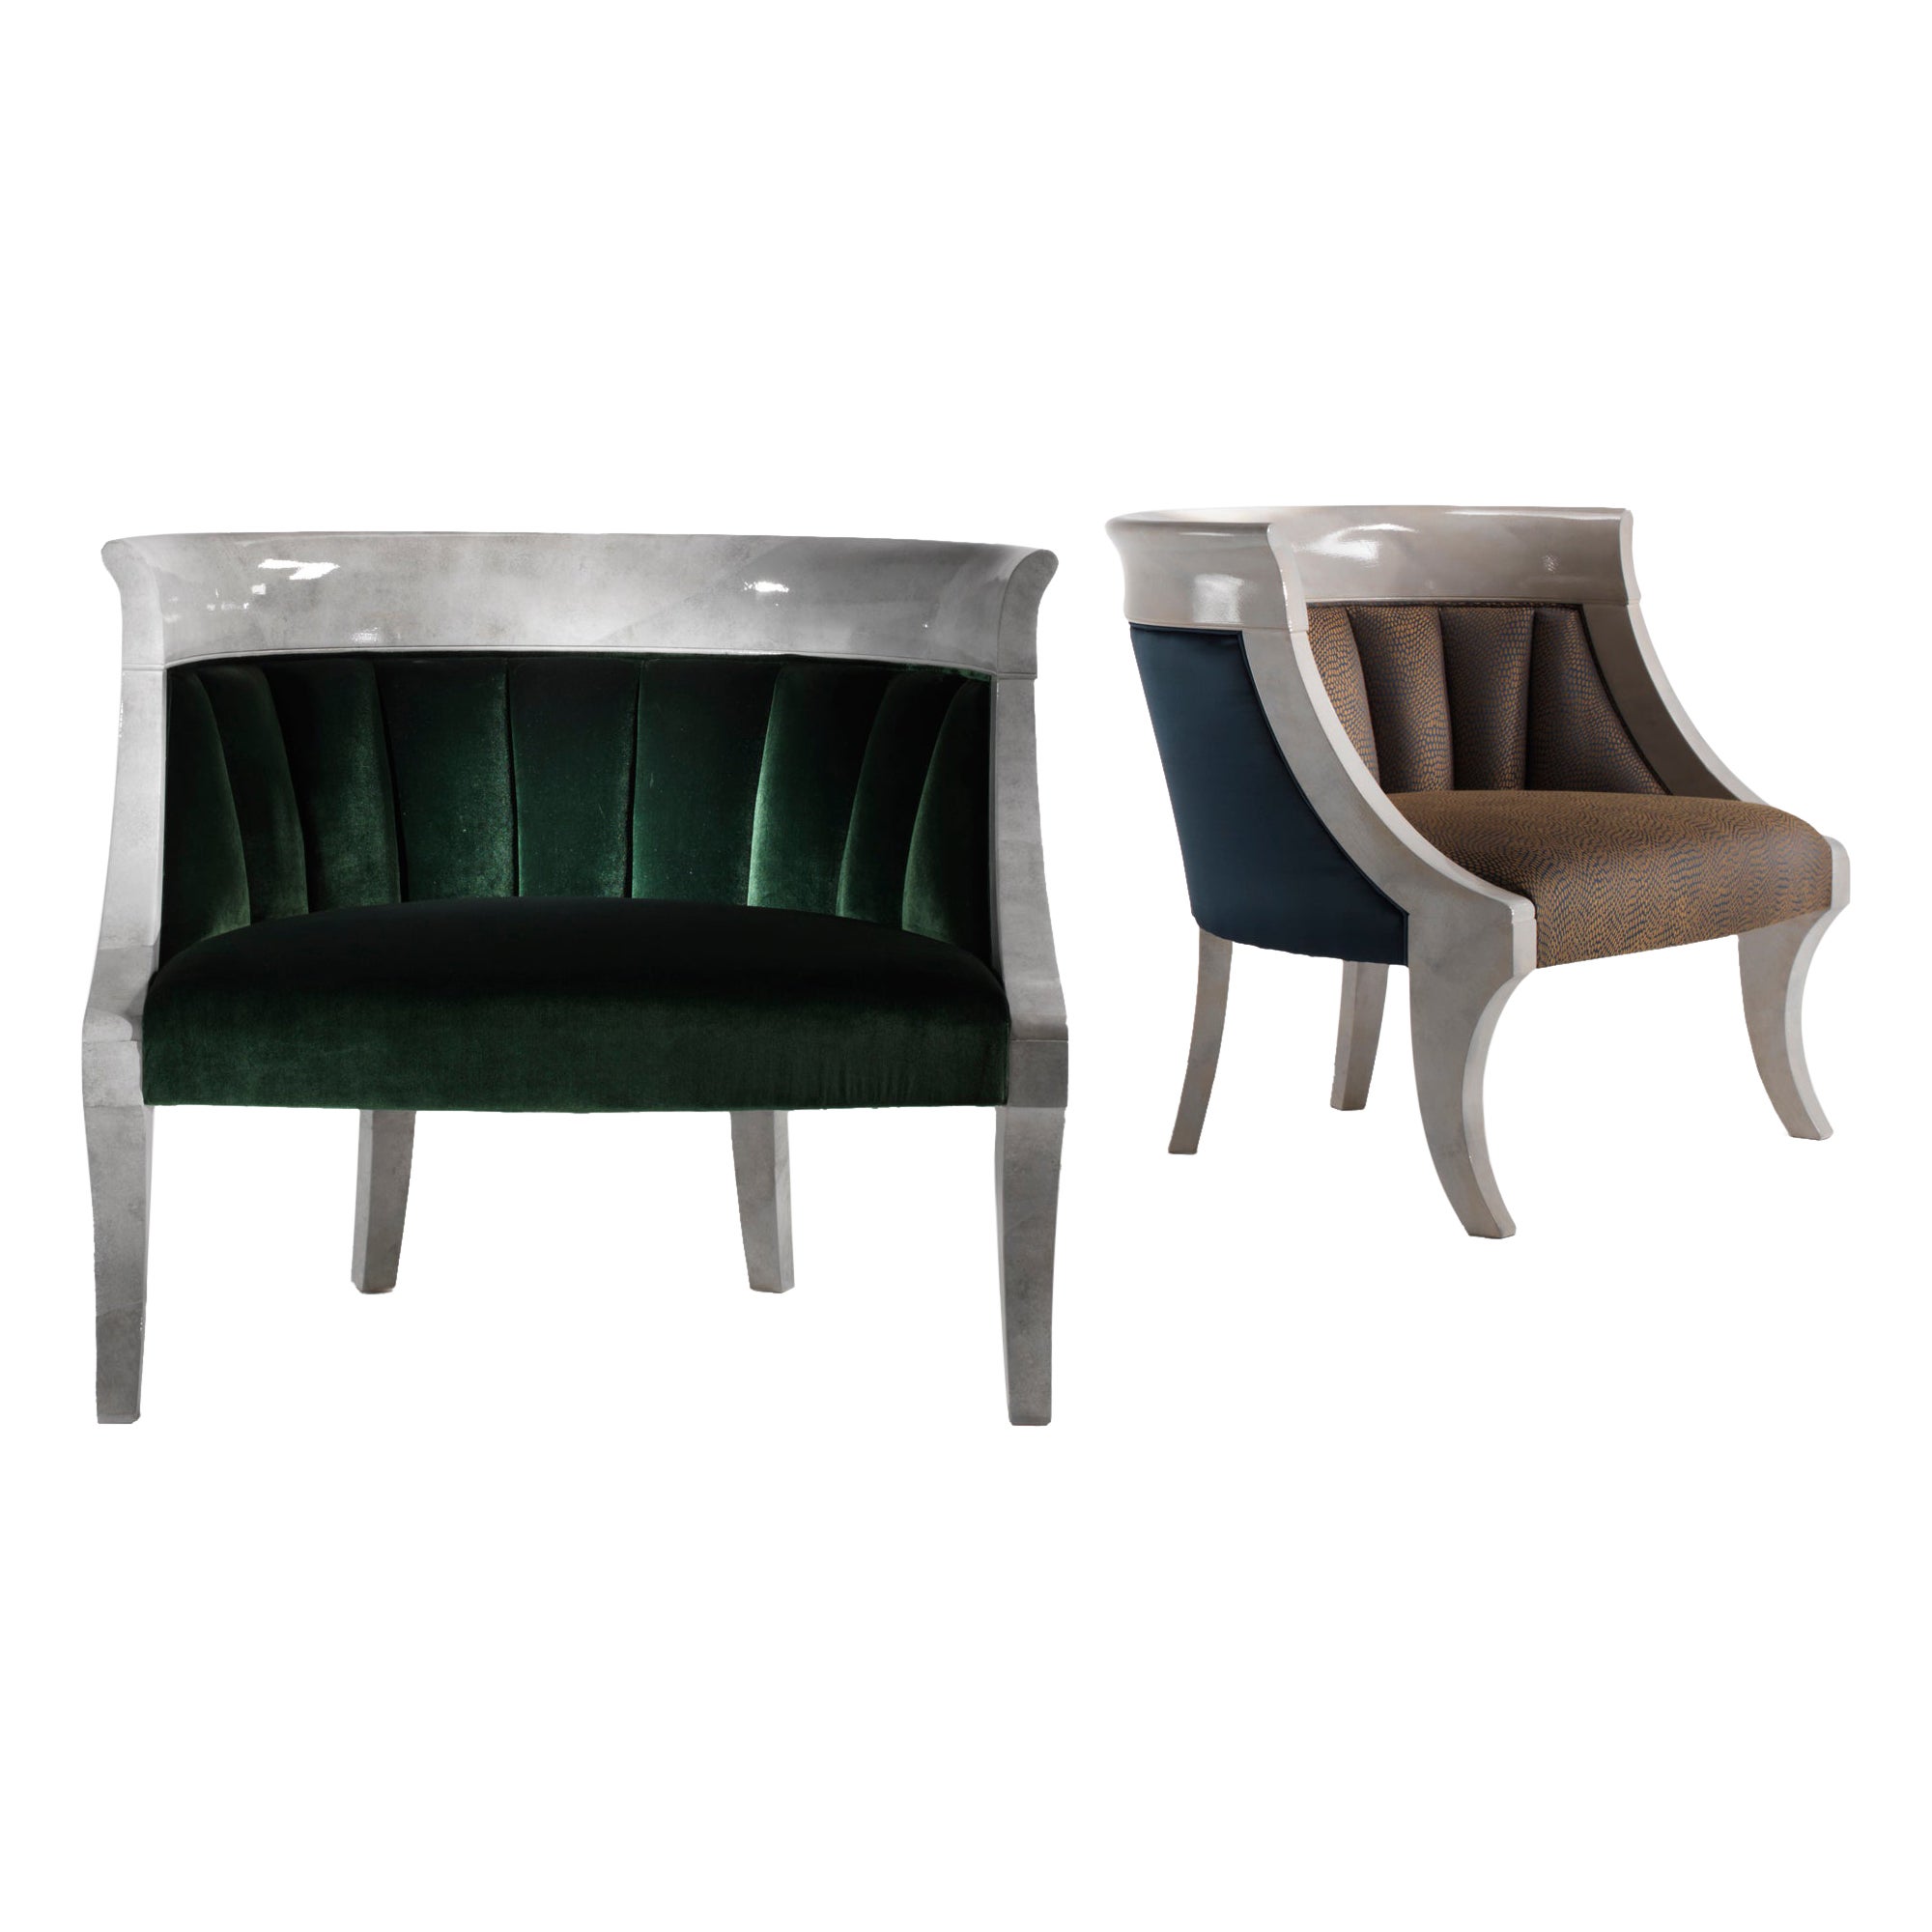 Conservatorio Living Armchair In Green Silk Velvet & White Parchment Lacquering